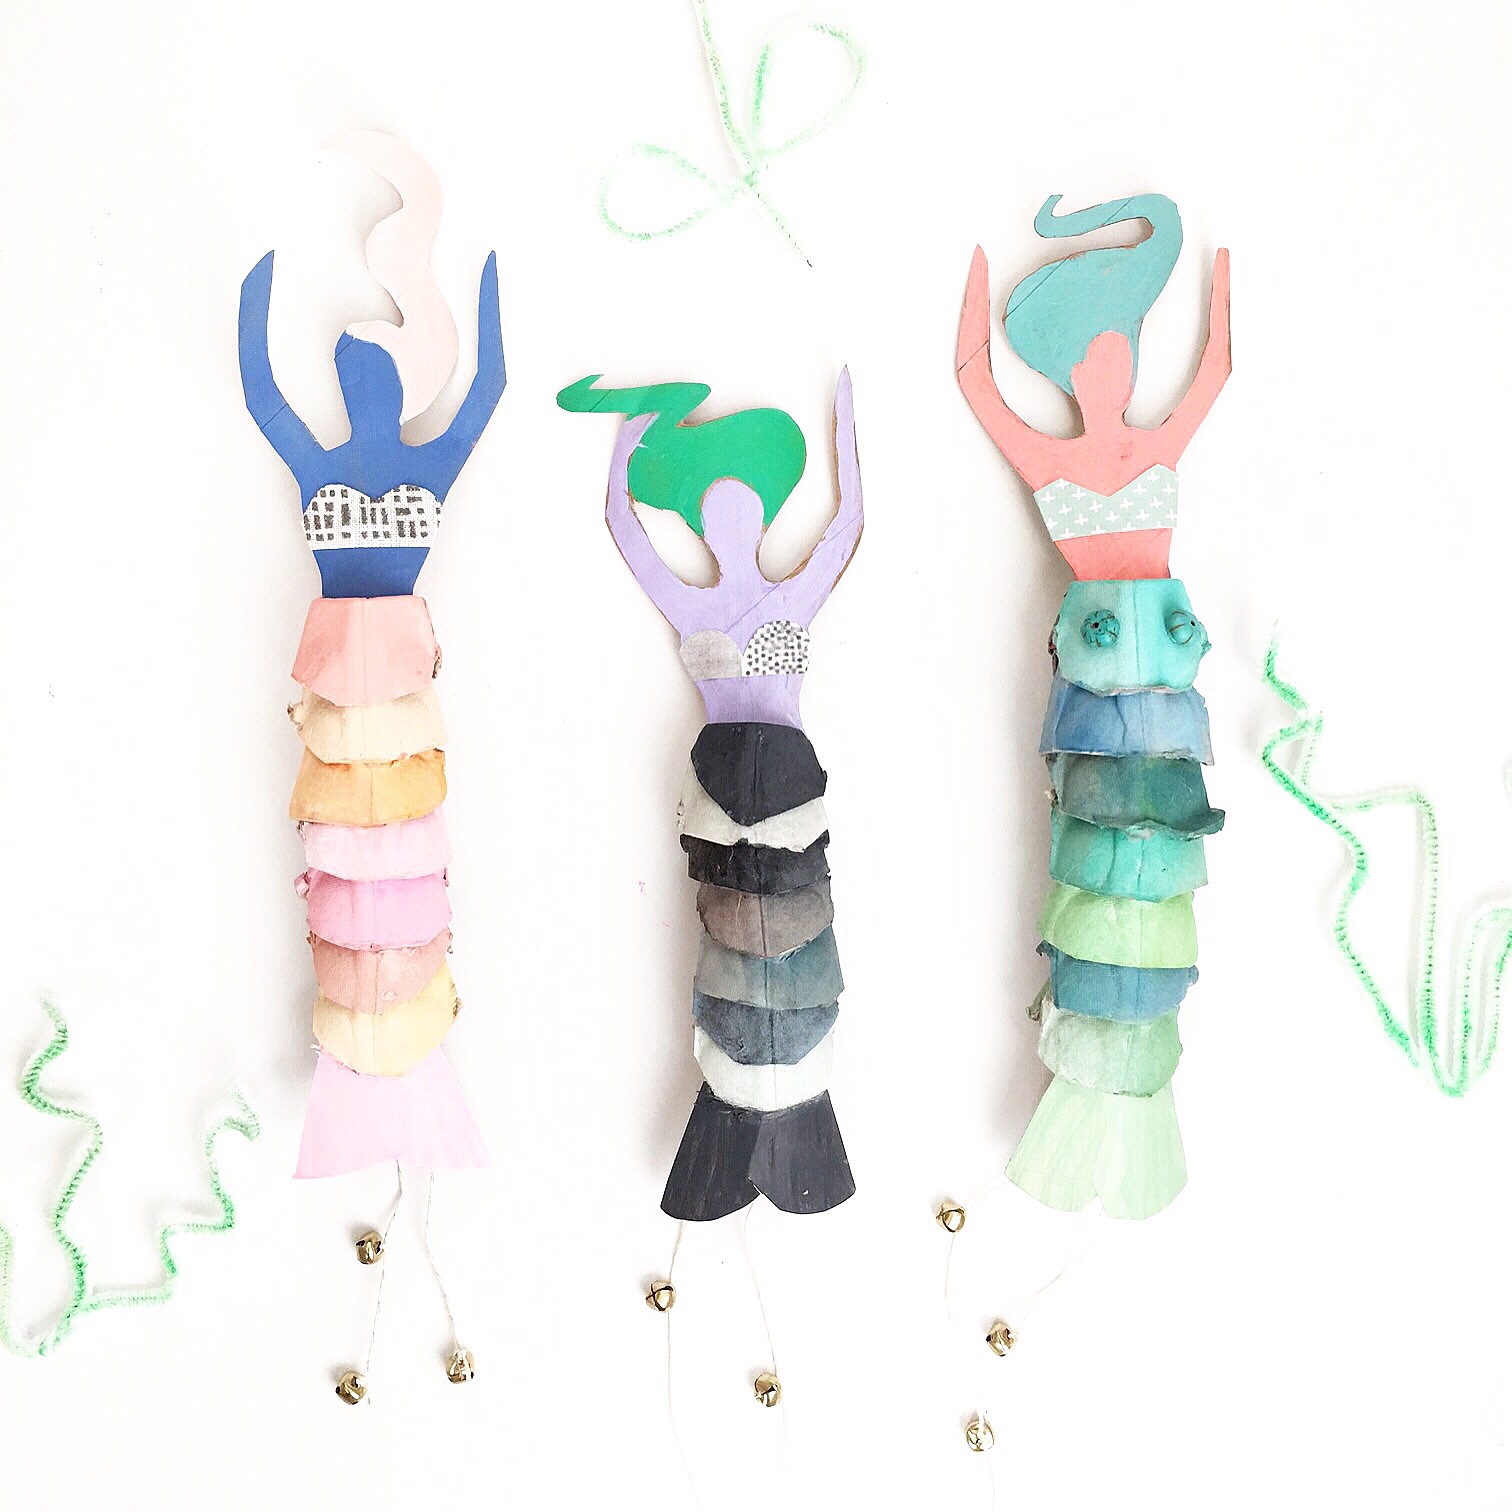 Beautiful Mixed Media Mermaid Doll Craft for Kids to Make